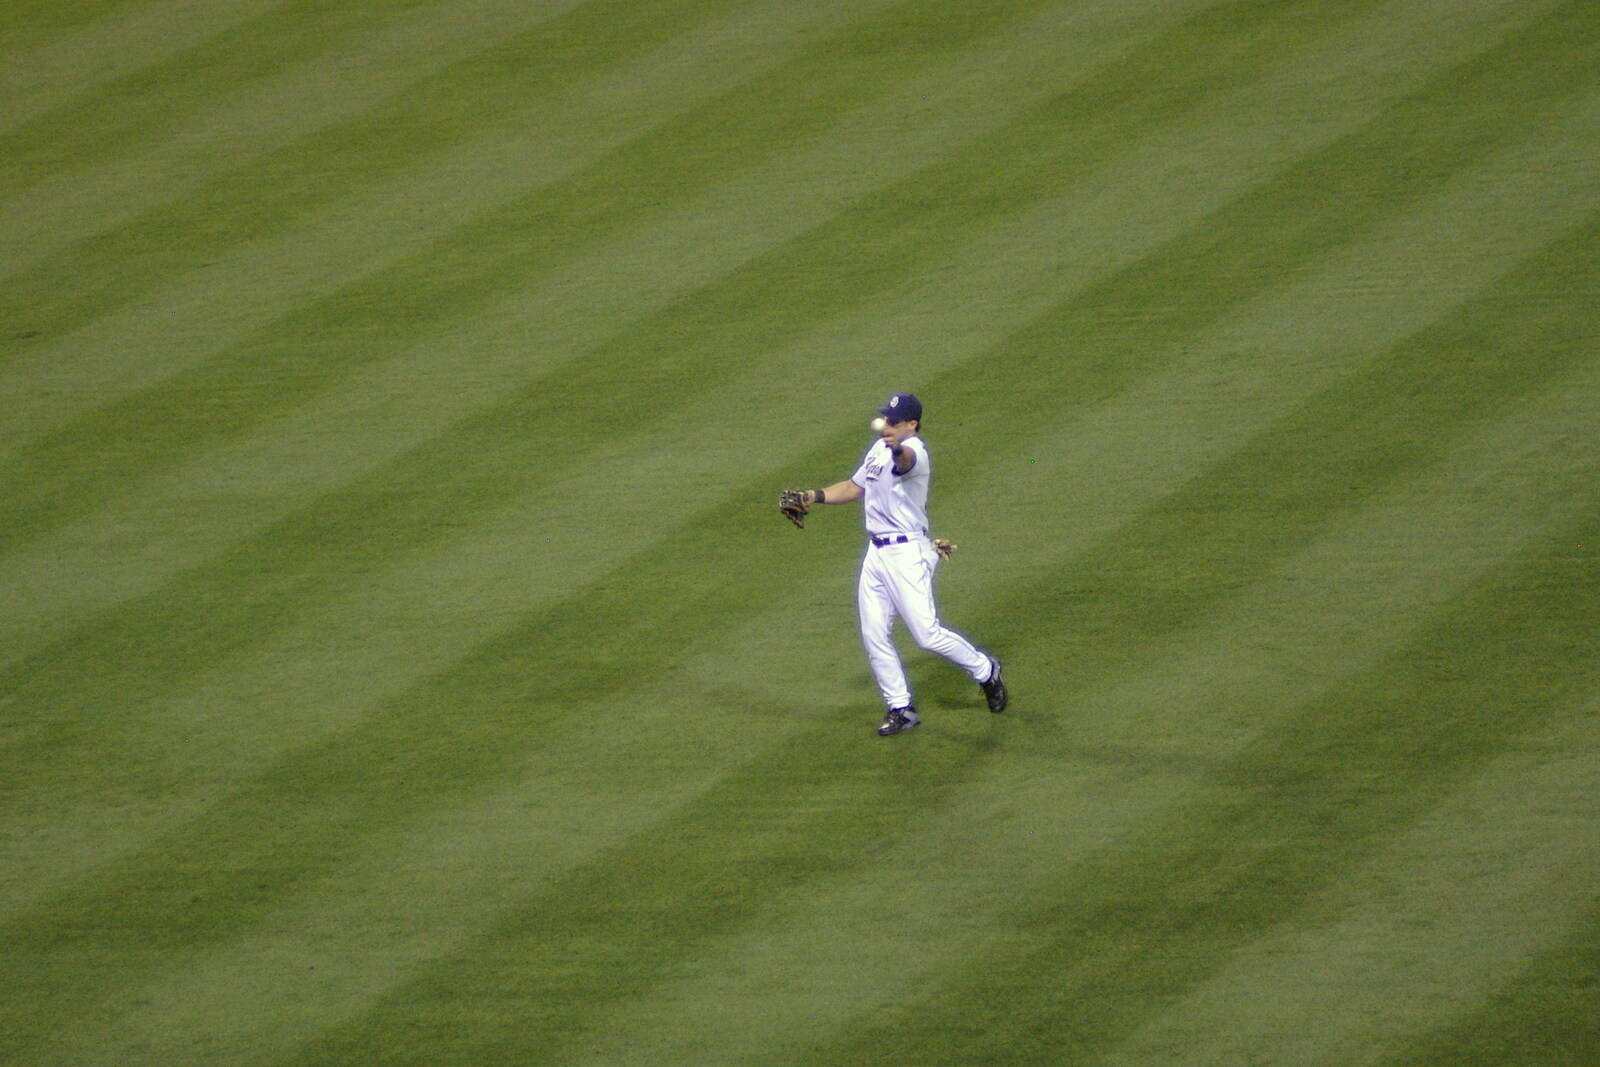 A catch occurs from The Padres at Petco Park: a Baseball Game, San Diego, California - 31st May 2005